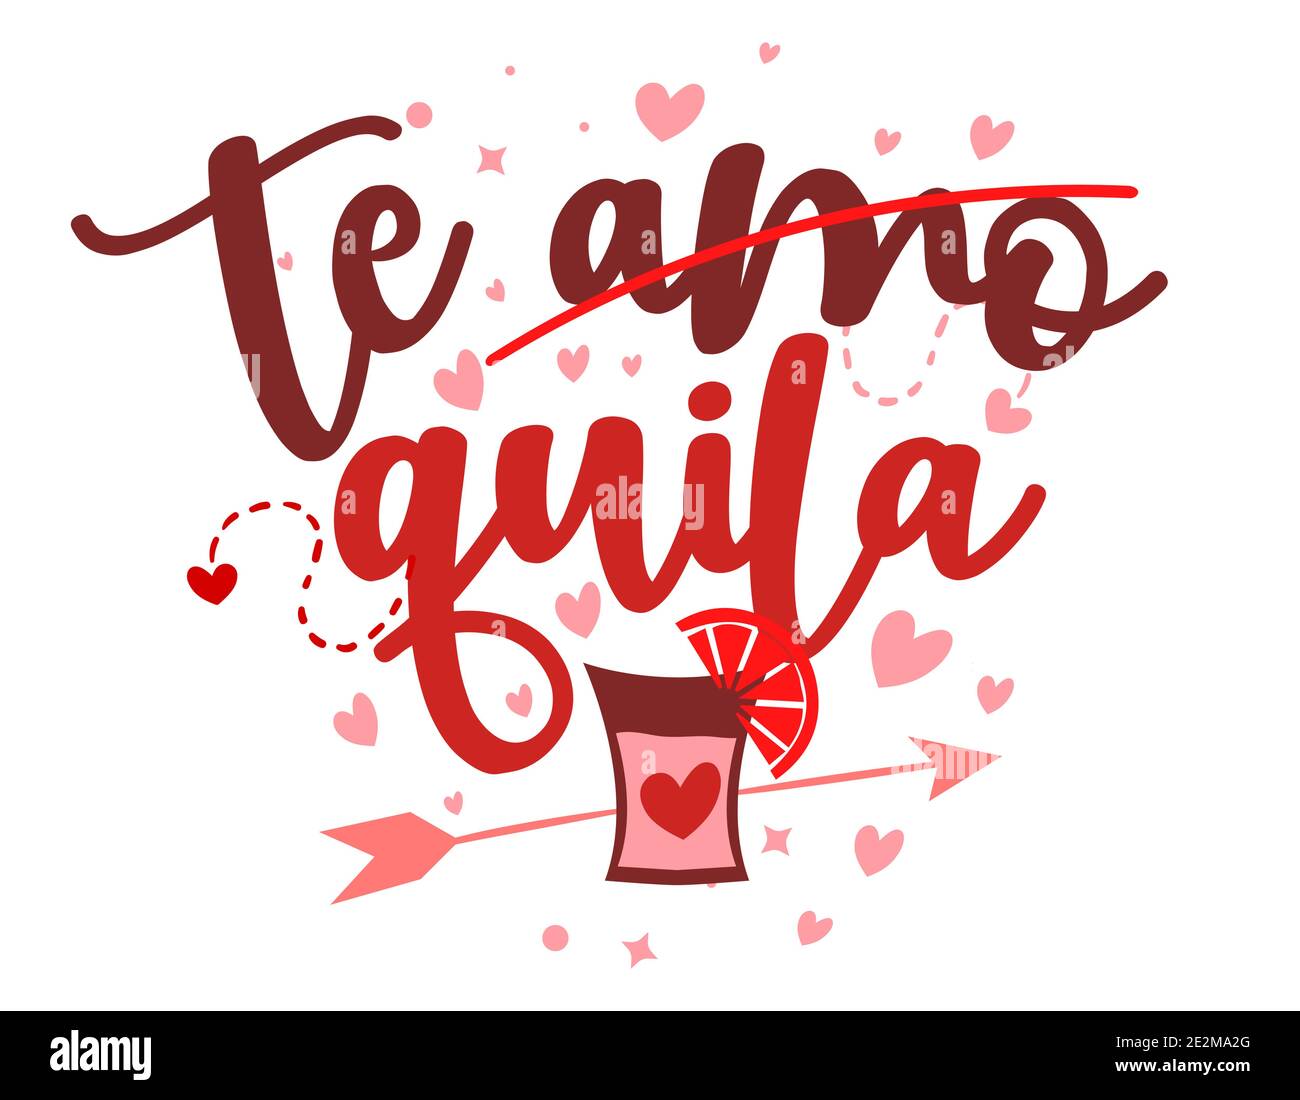 Te amo (I love you in Spain) crossed out TEQUILA - SASSY phrase for Anti Valentine day. Hand drawn lettering for Lovely greetings cards, invitations. Stock Vector